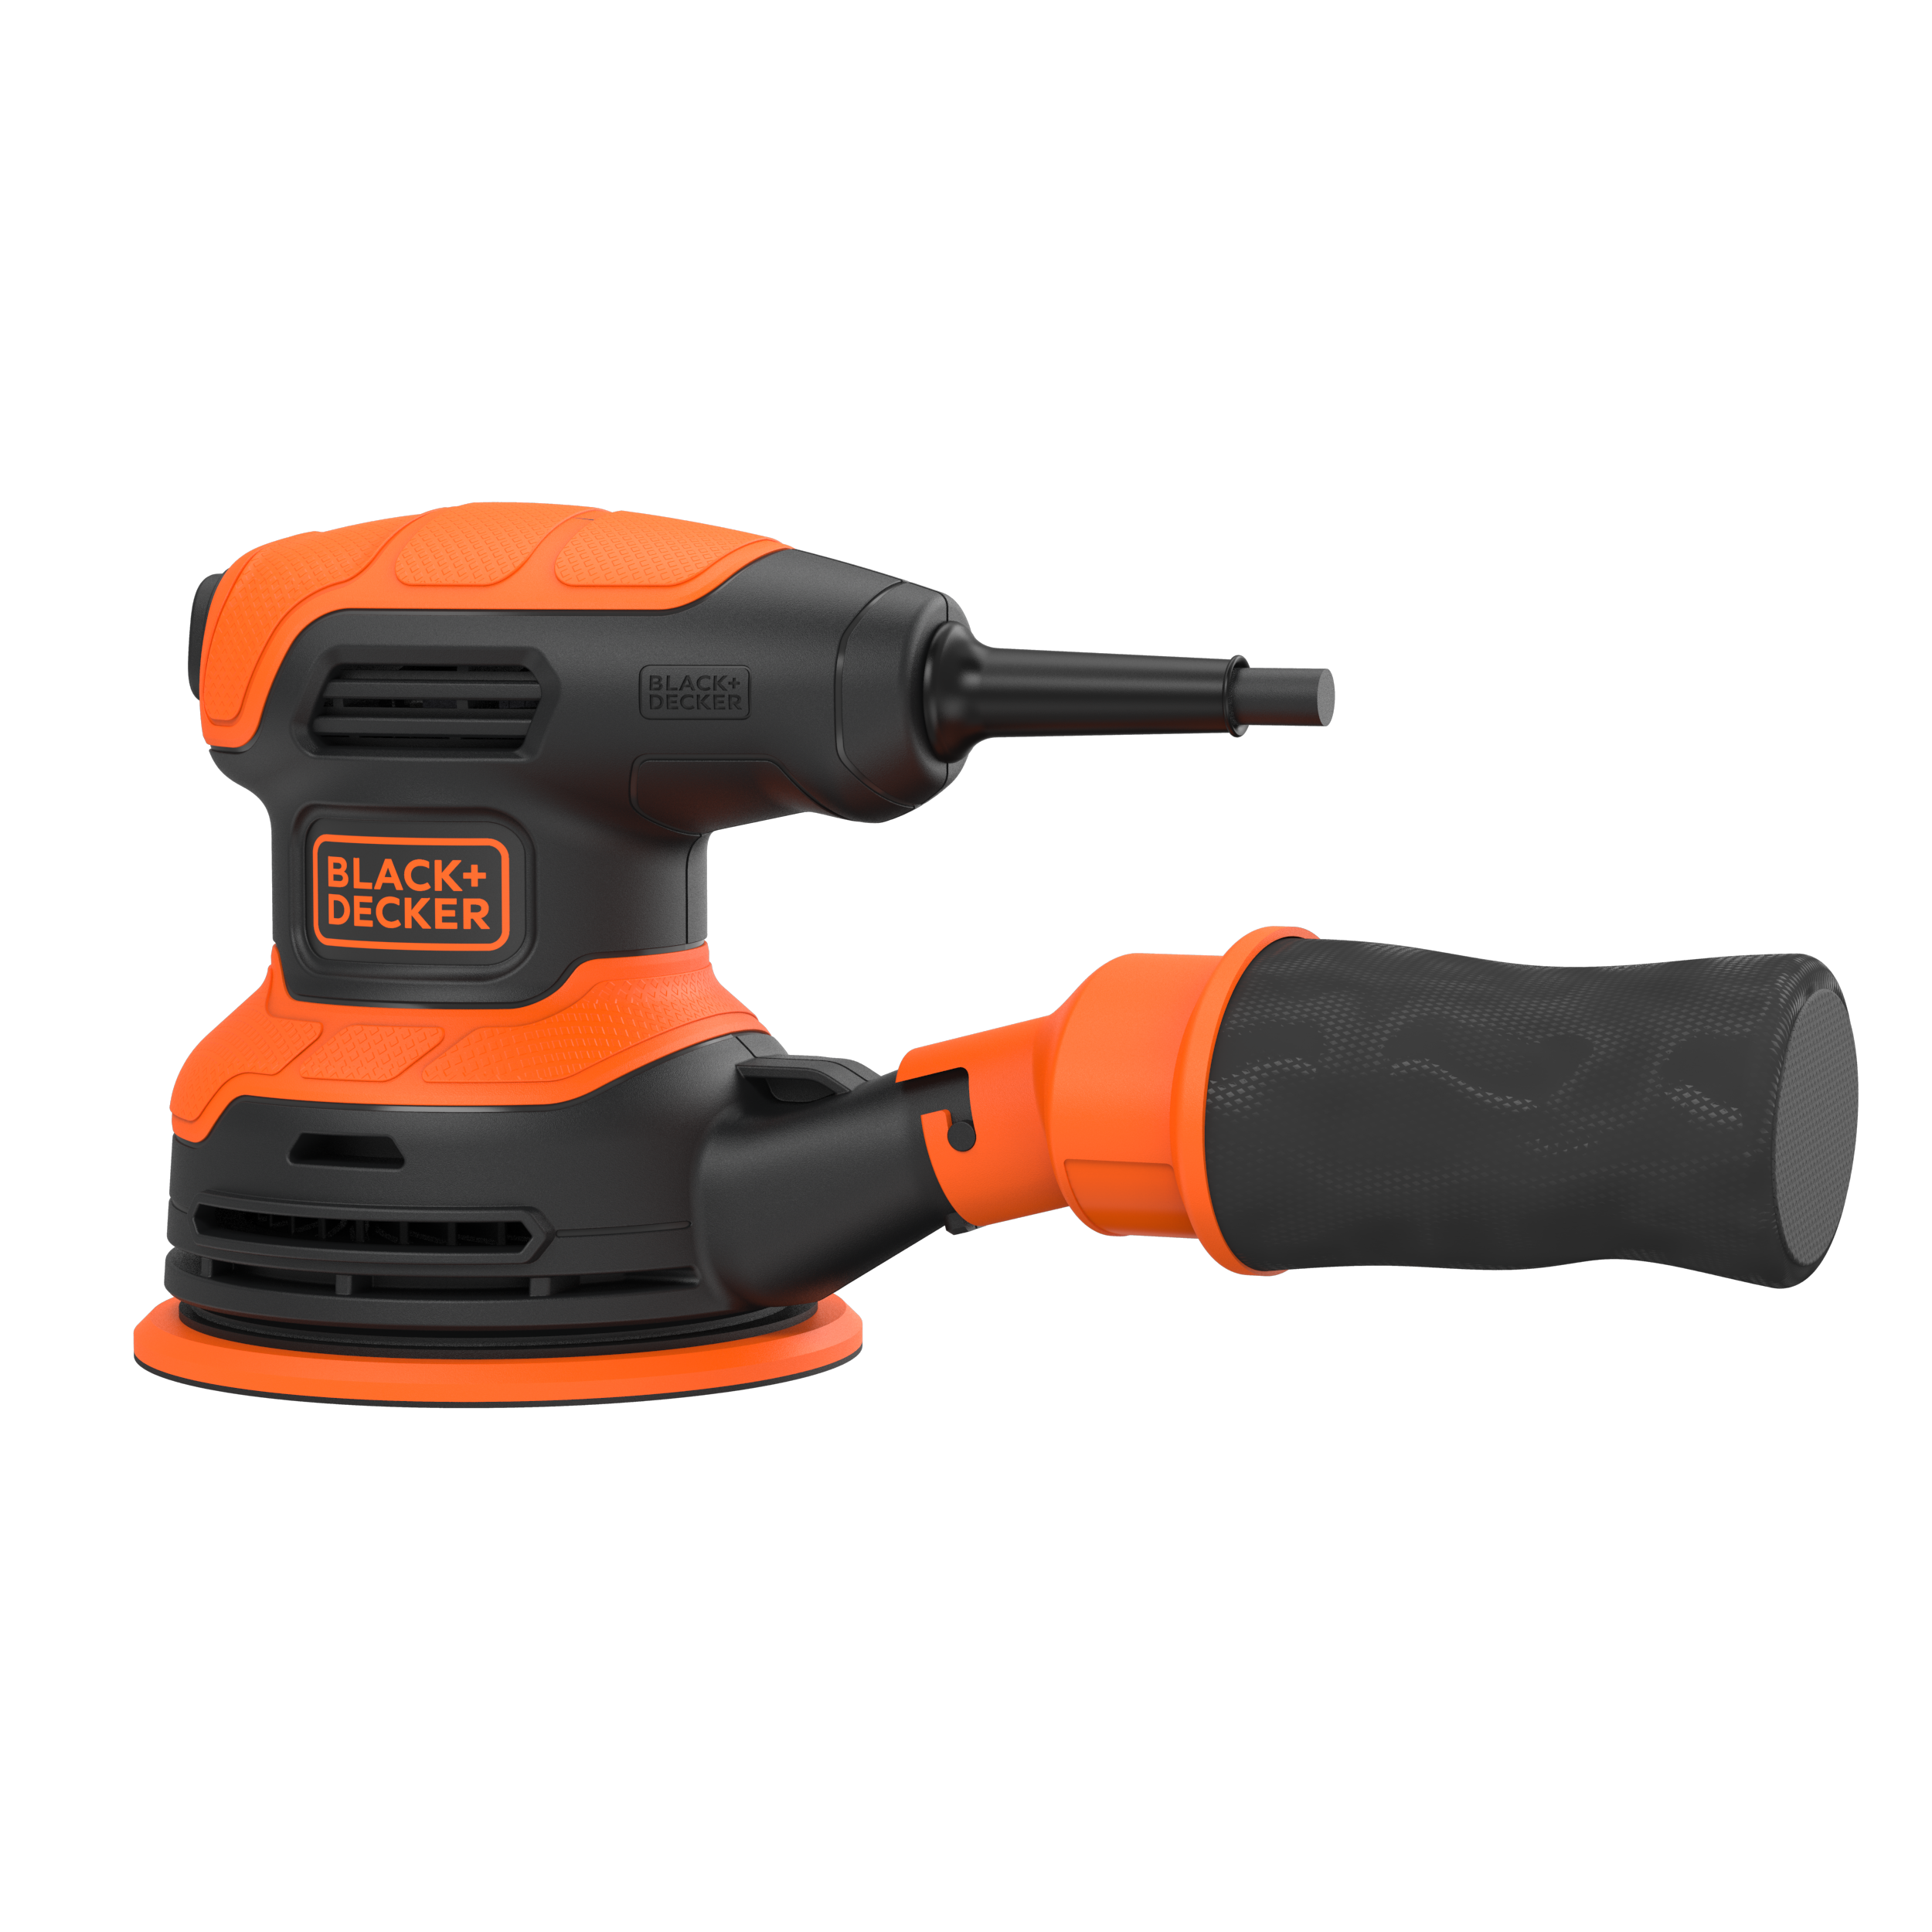 Black & Decker LCC420 (Review and Video Incl.)